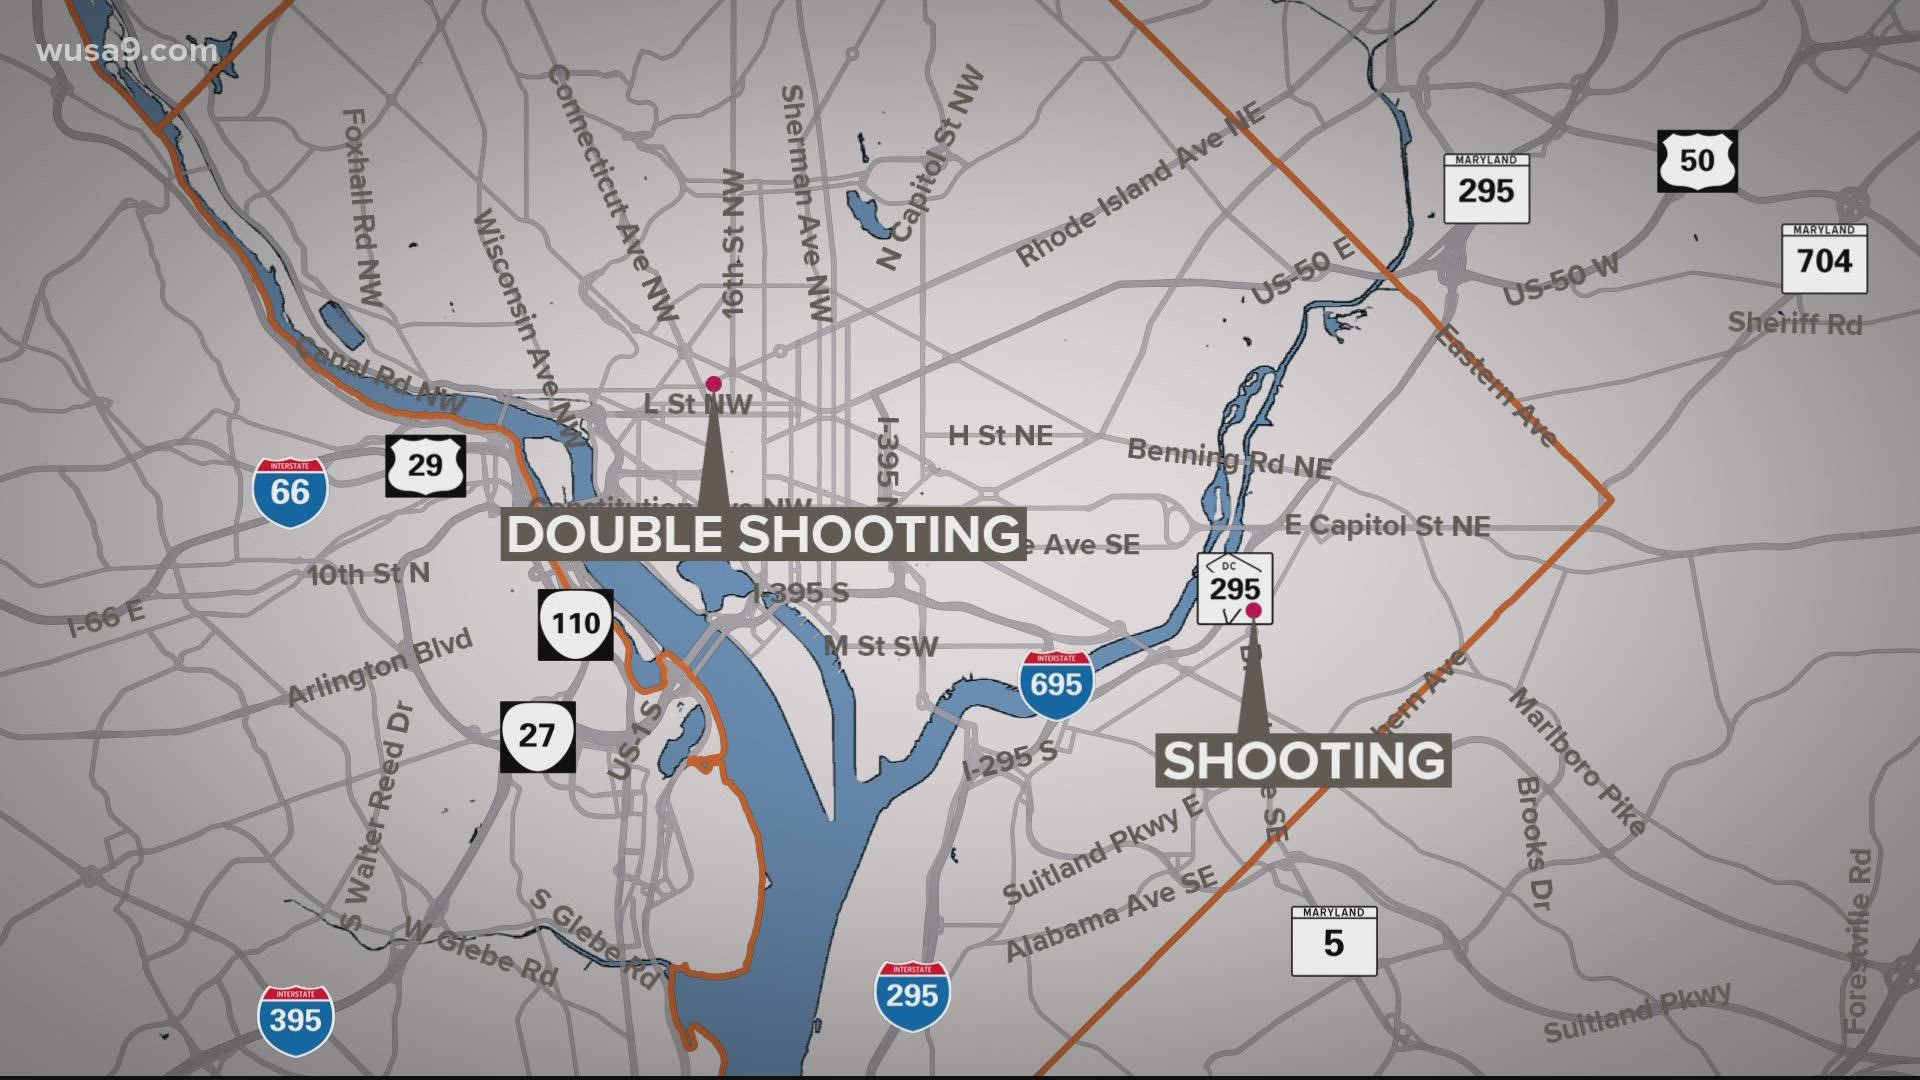 A pair of shootings injured three people in DC early Friday